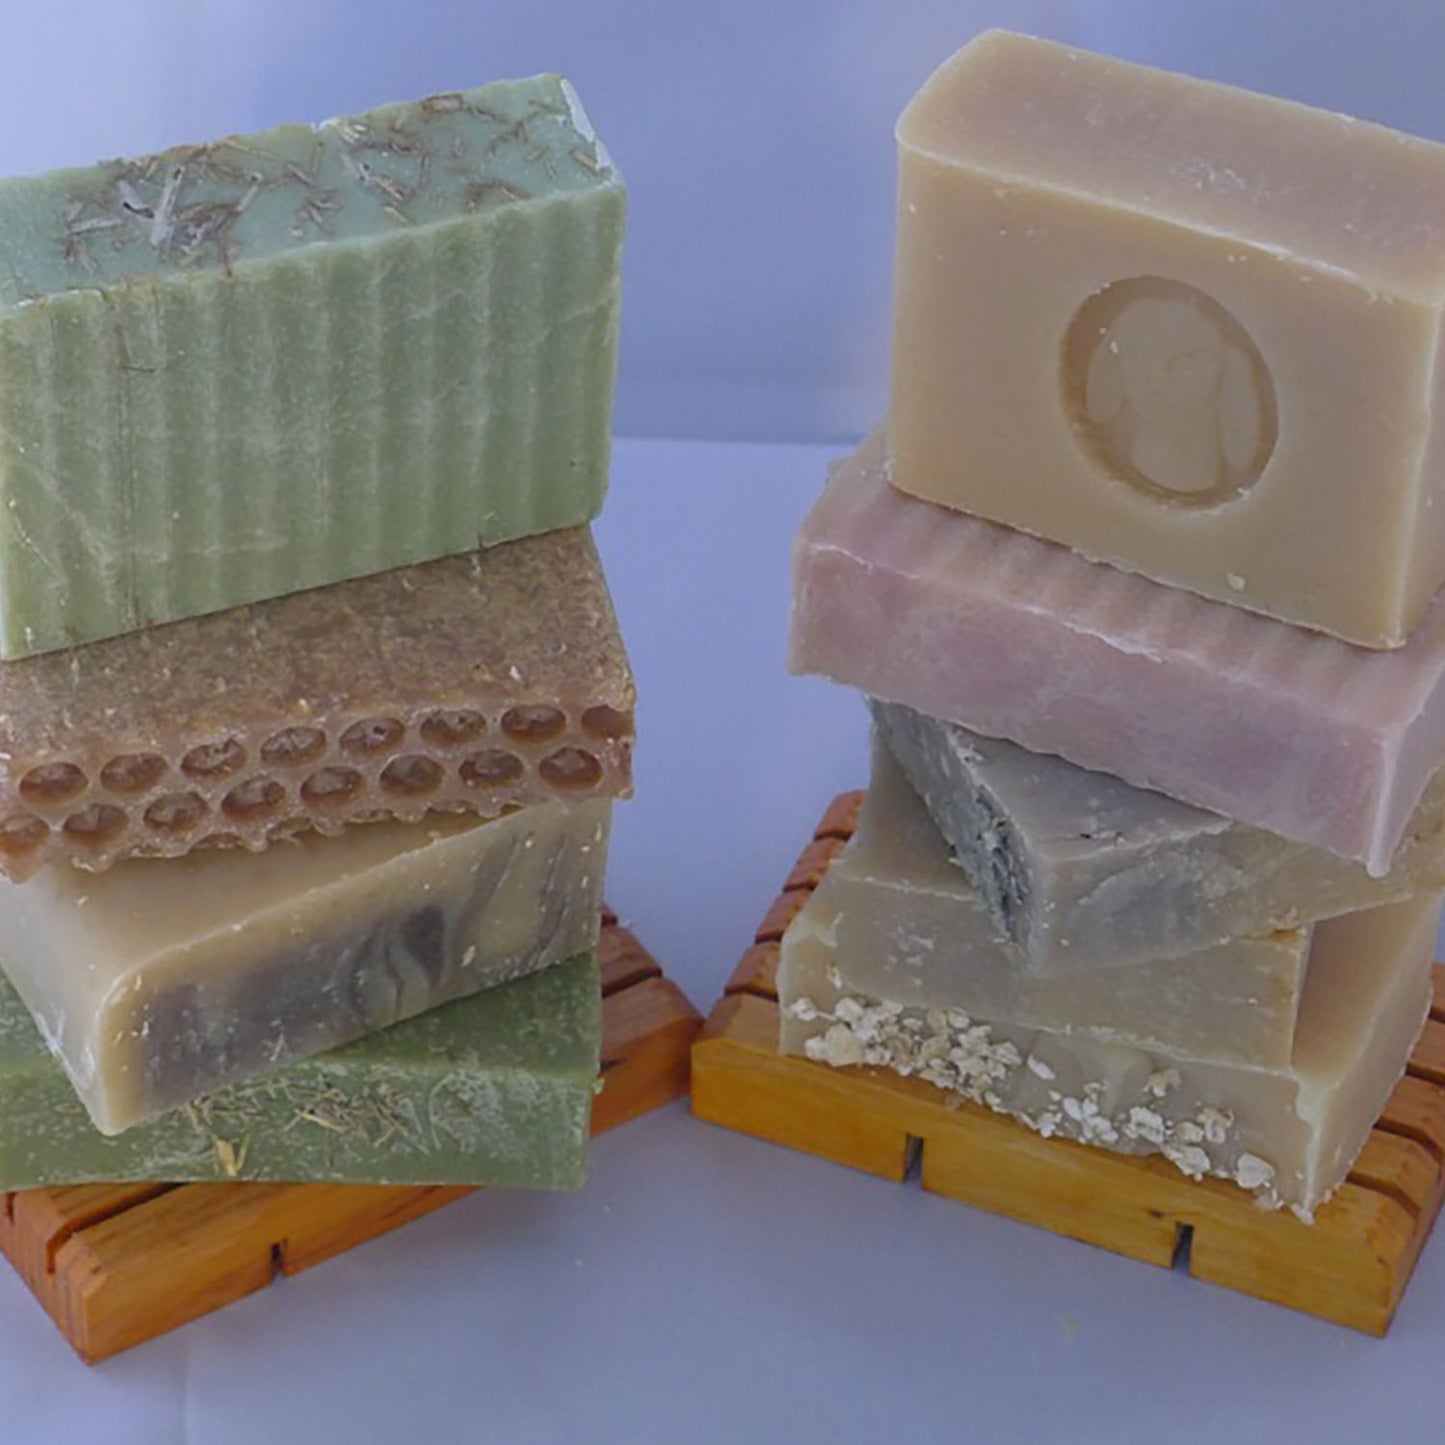 4 Soap Bars for $28